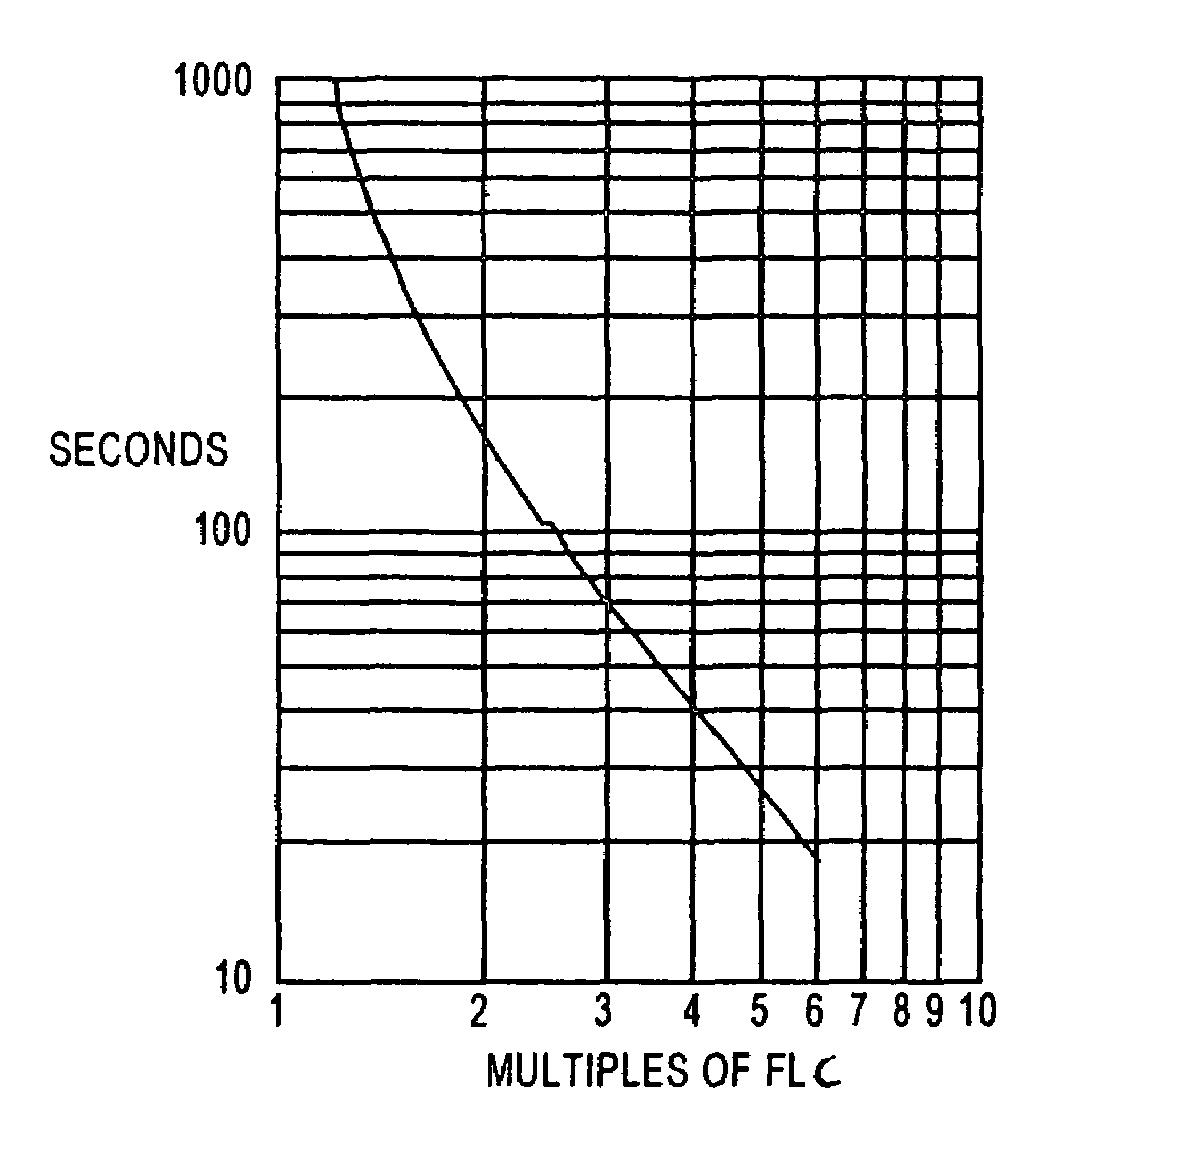 Rotor thermal model for use in motor protection